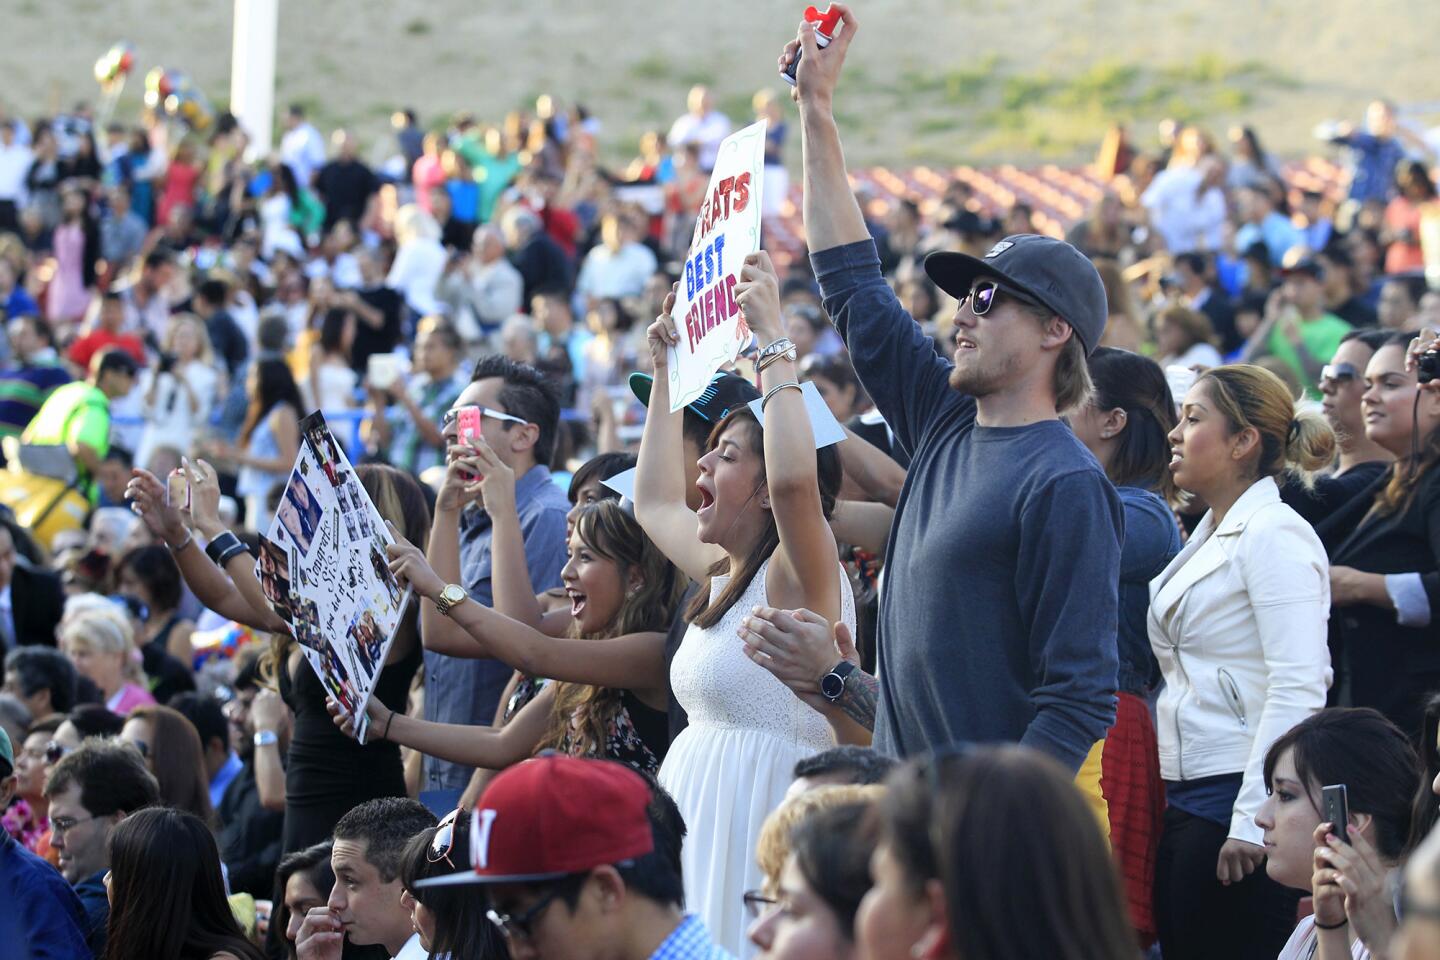 Family and friends voice their support during Orange Coast College's 66th Commencement Ceremony on Wednesday at Pacific Amphitheatre in Costa Mesa. (Kevin Chang/ Daily Pilot)